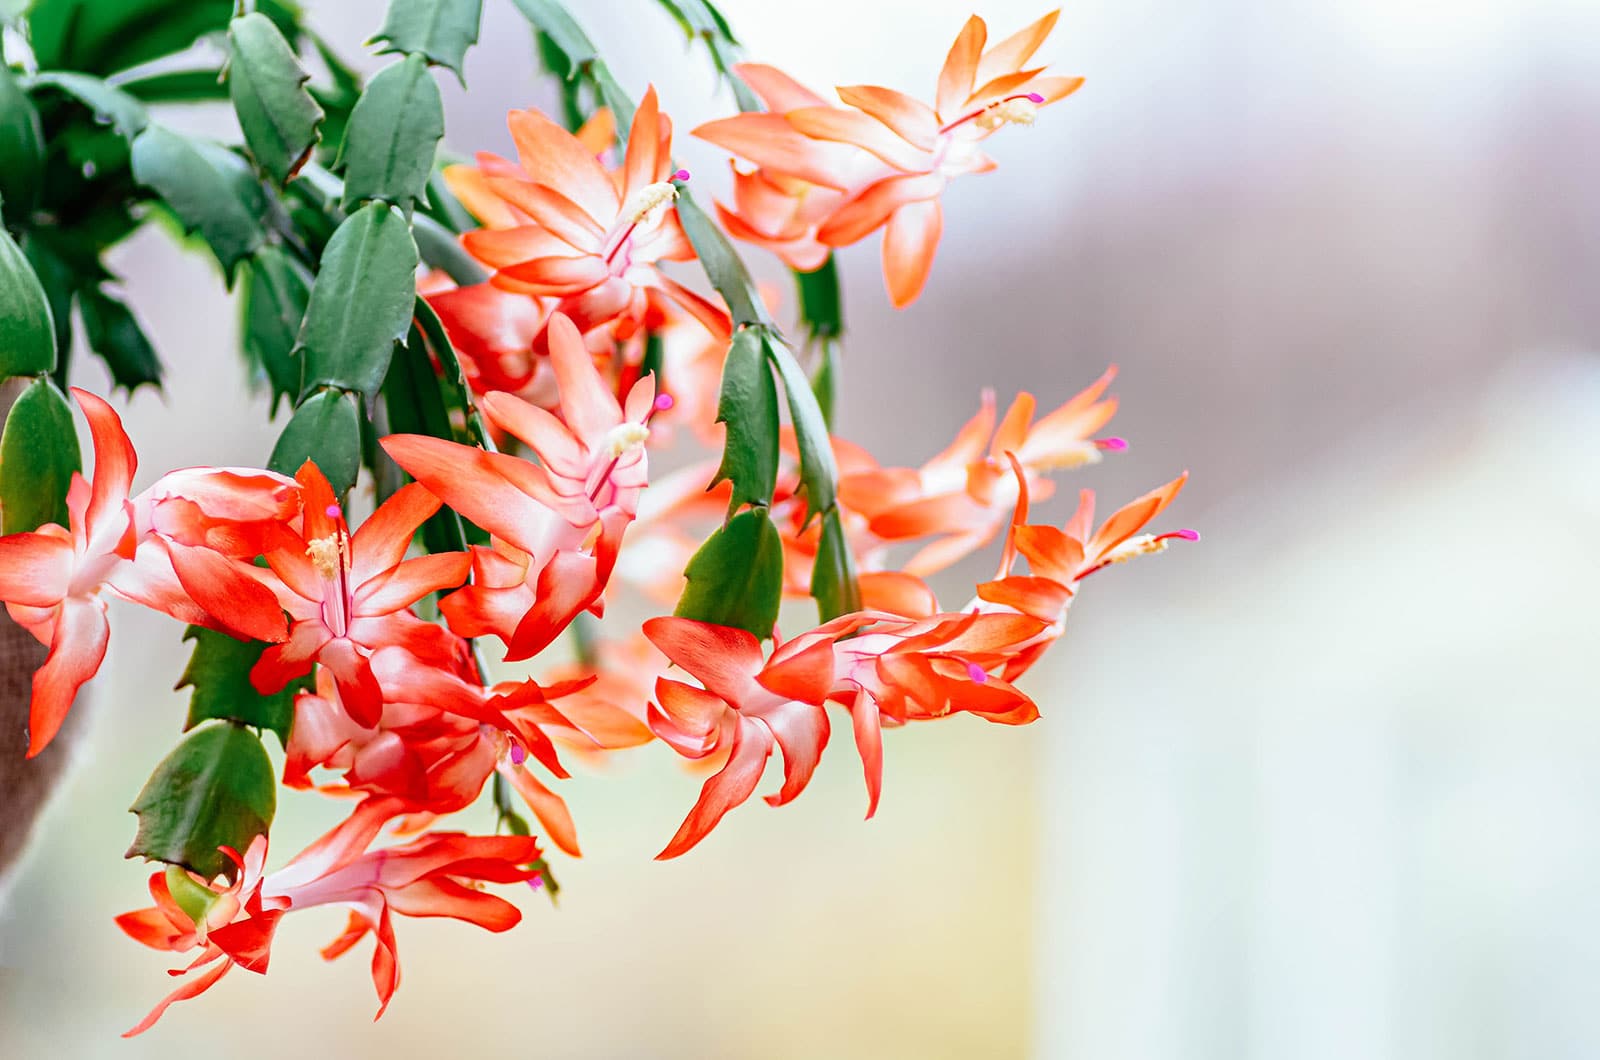 A Thanksgiving cactus houseplant in bloom with bright reddish-orange flowers